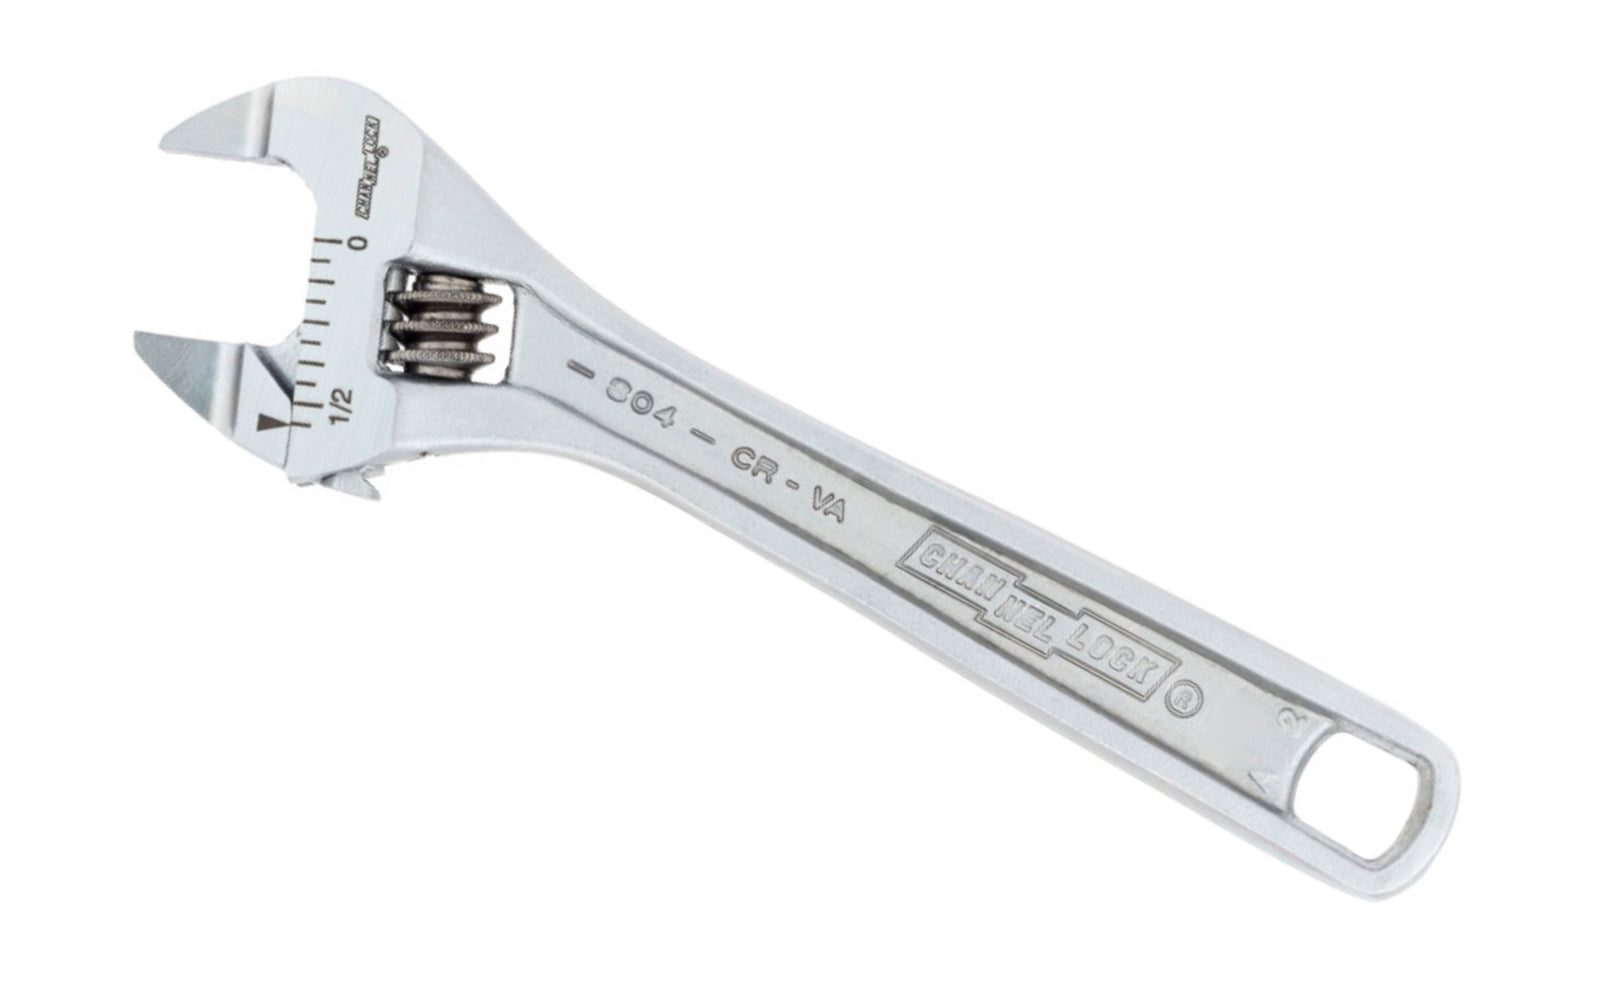 Channellock 4" Xtra Slim Jaw Adjustable Wrench features slimmer jaws. Measurement scales are laser engraved (in. on front, mm. on reverse) & are handy for sizing nuts, pipe & tube diameters. Rugged Chrome Vanadium steel. Chrome finish for rust prevention. 4.52" size. Extra Slim Wrench Channelock Model 804s.